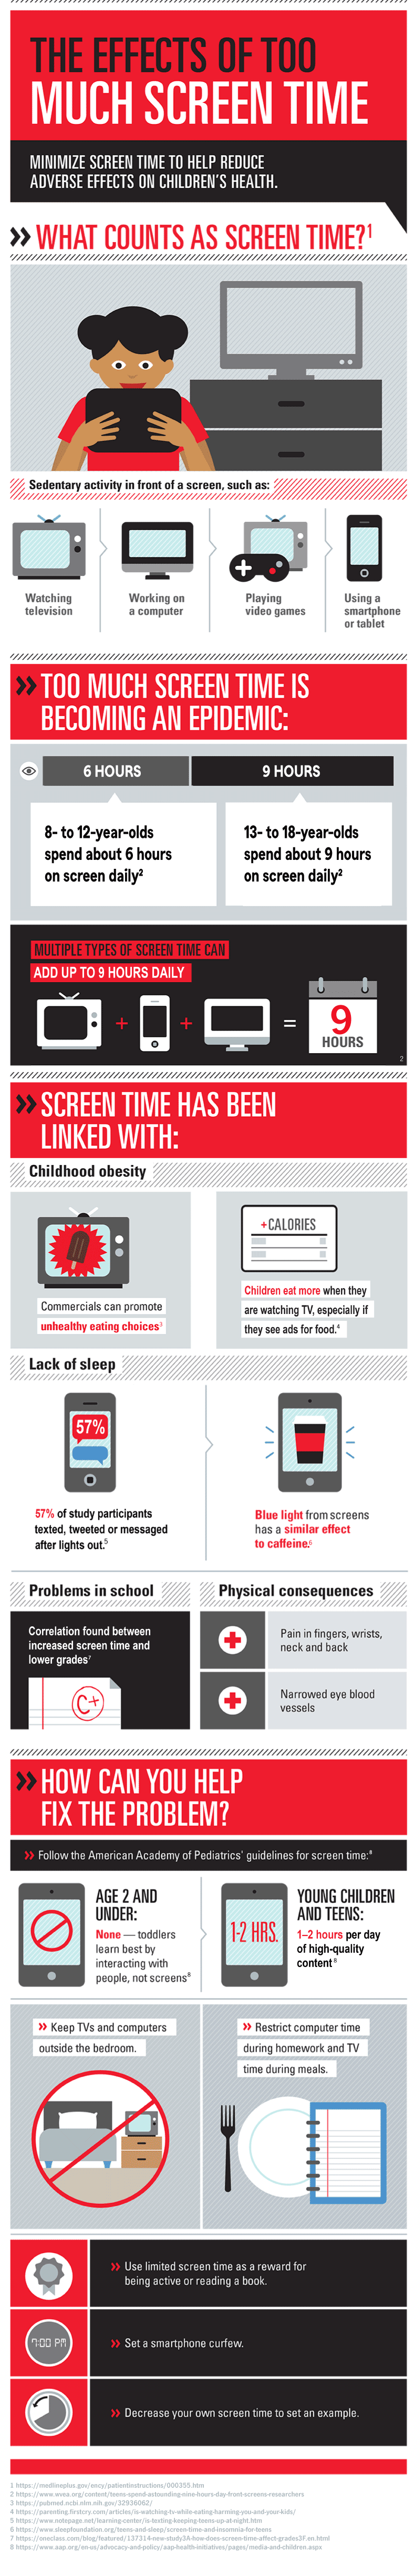 the-effects-of-too-much-screentime-infographic